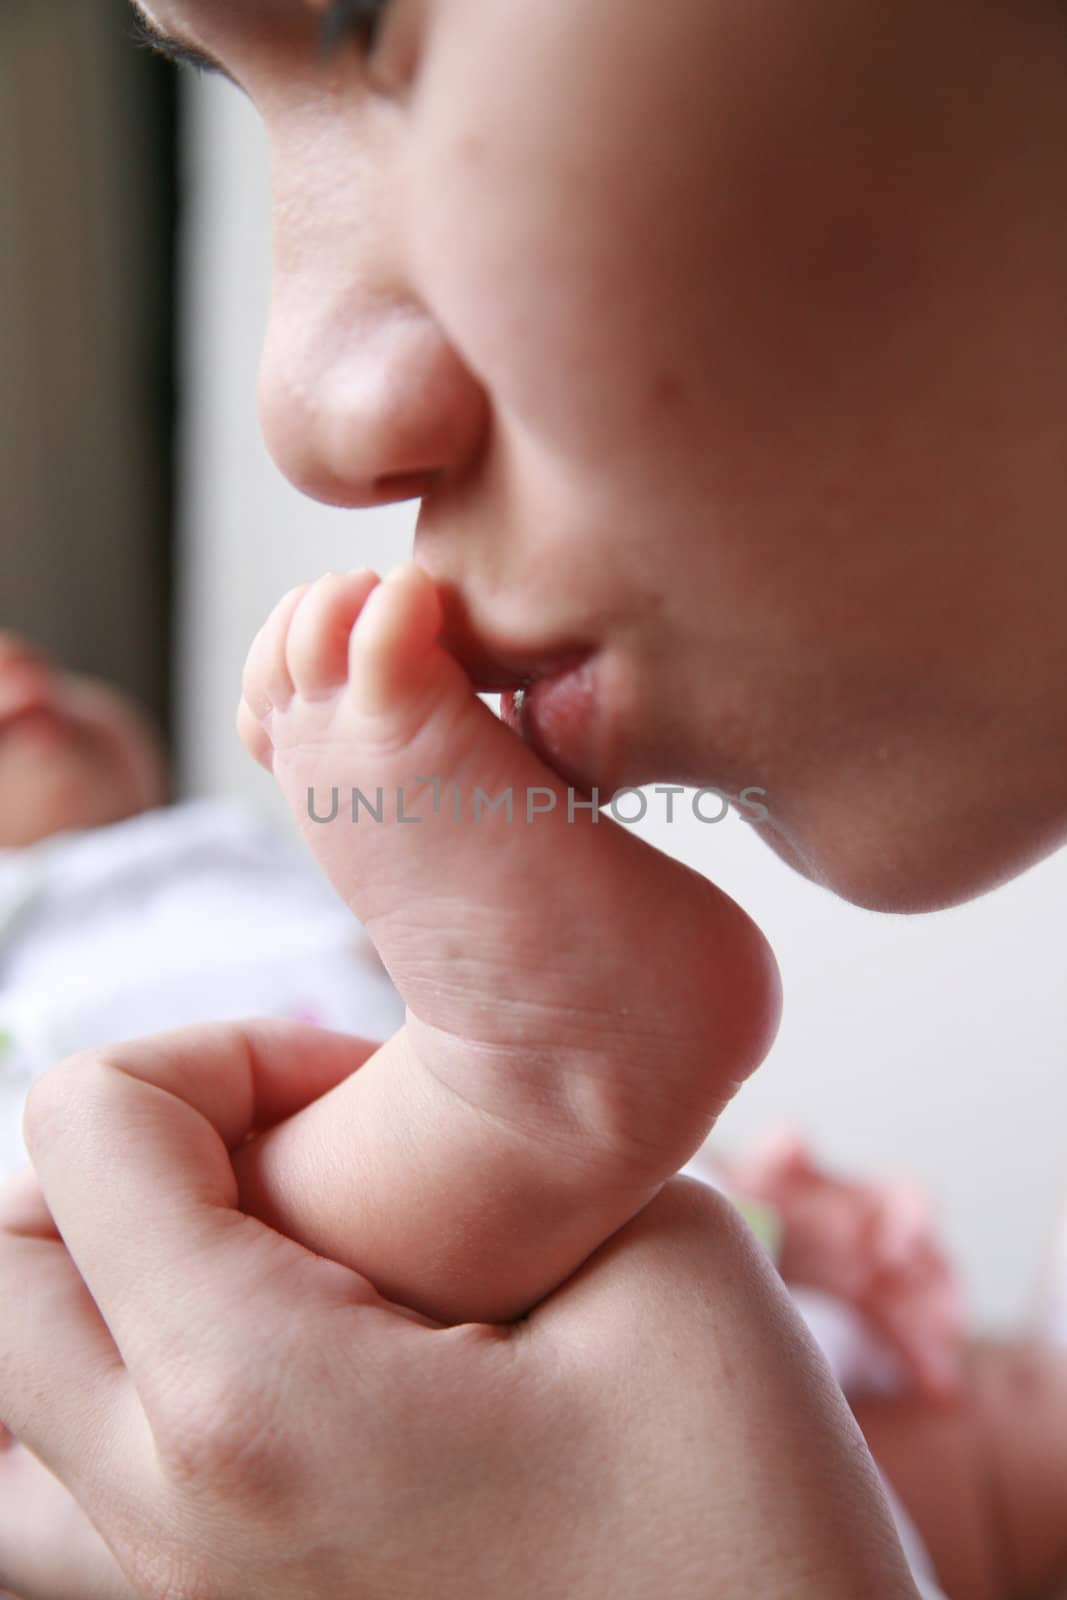 mother kiss baby's foot by duron123